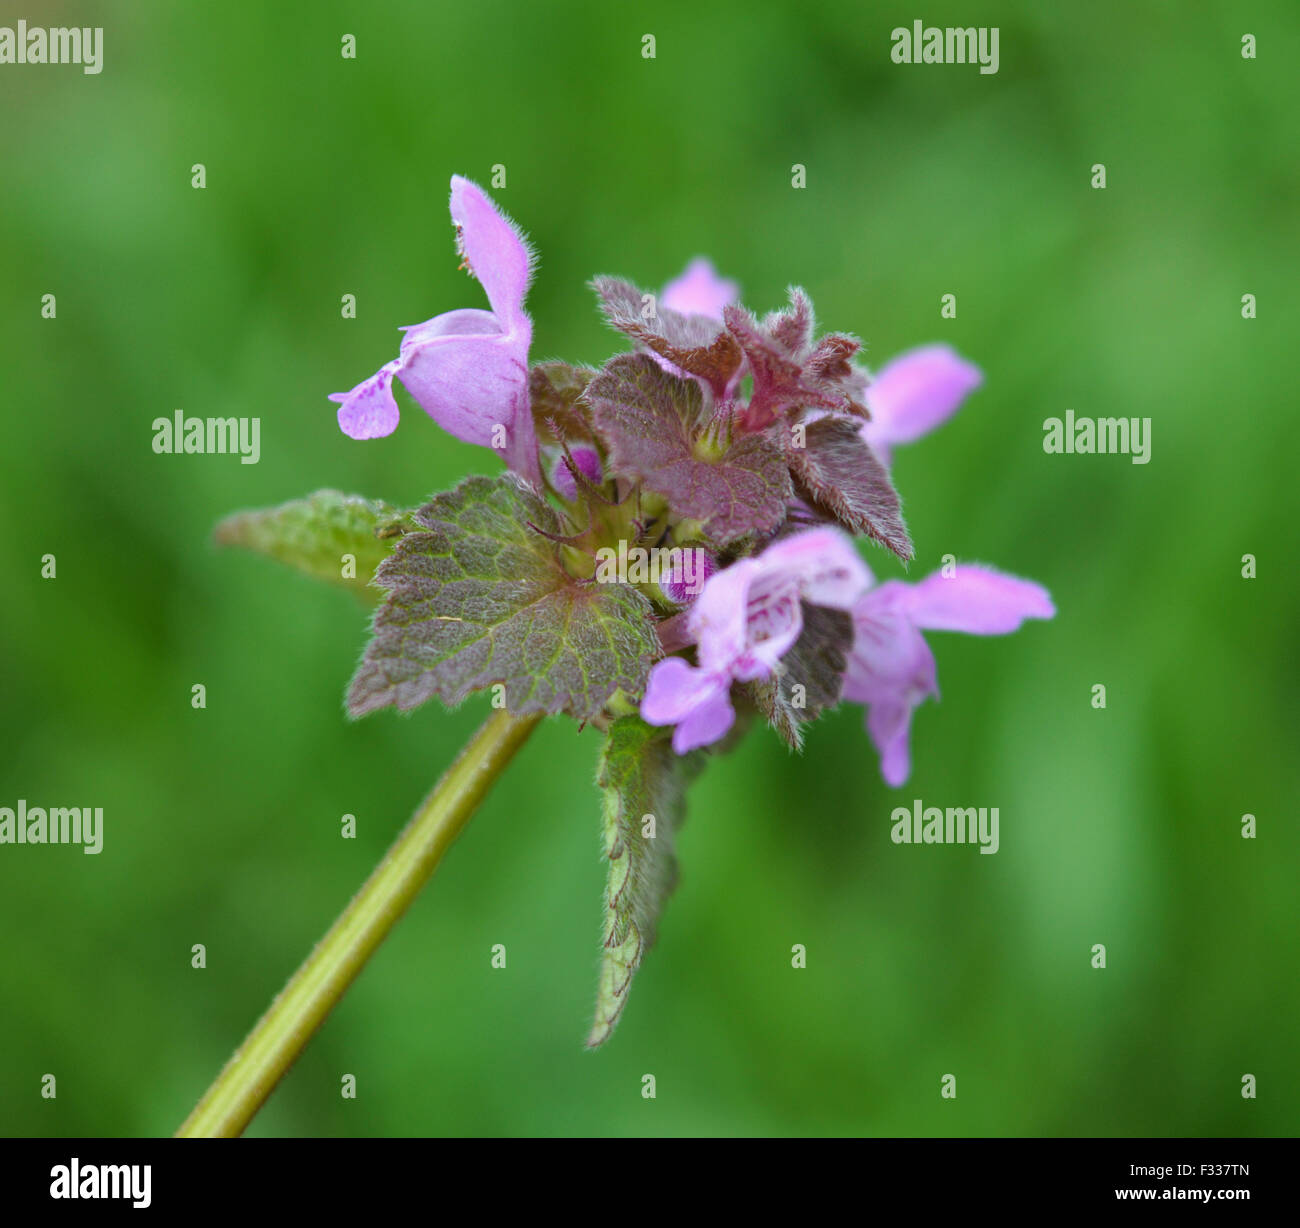 Dead nettle with pink petals Stock Photo